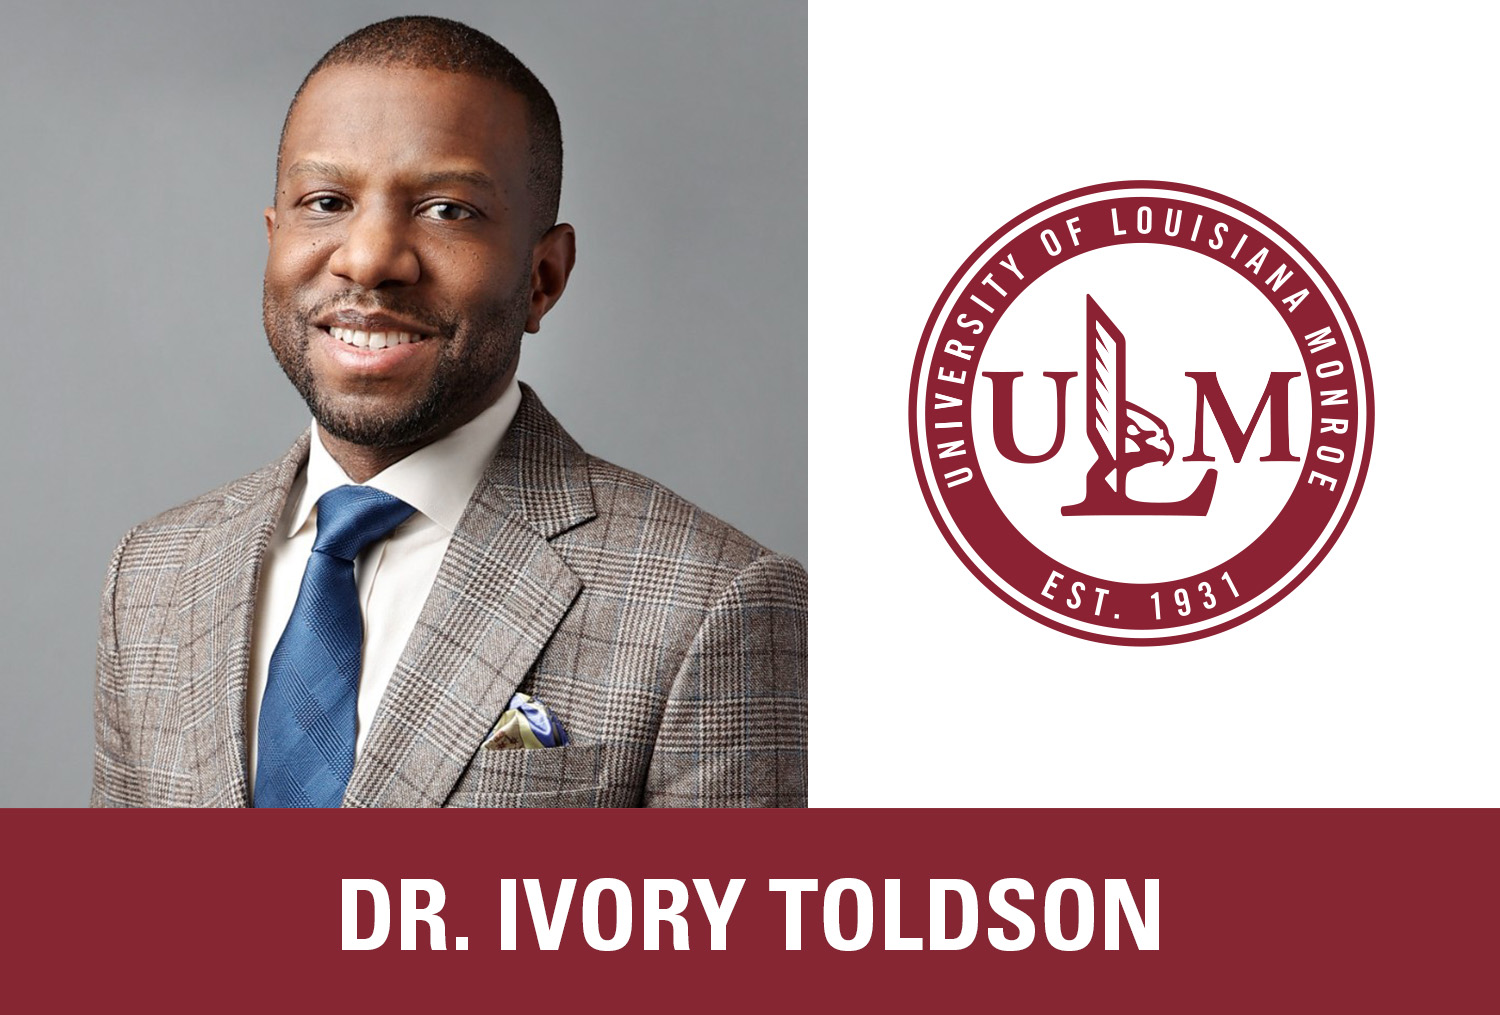 Dr. Ivory Toldson